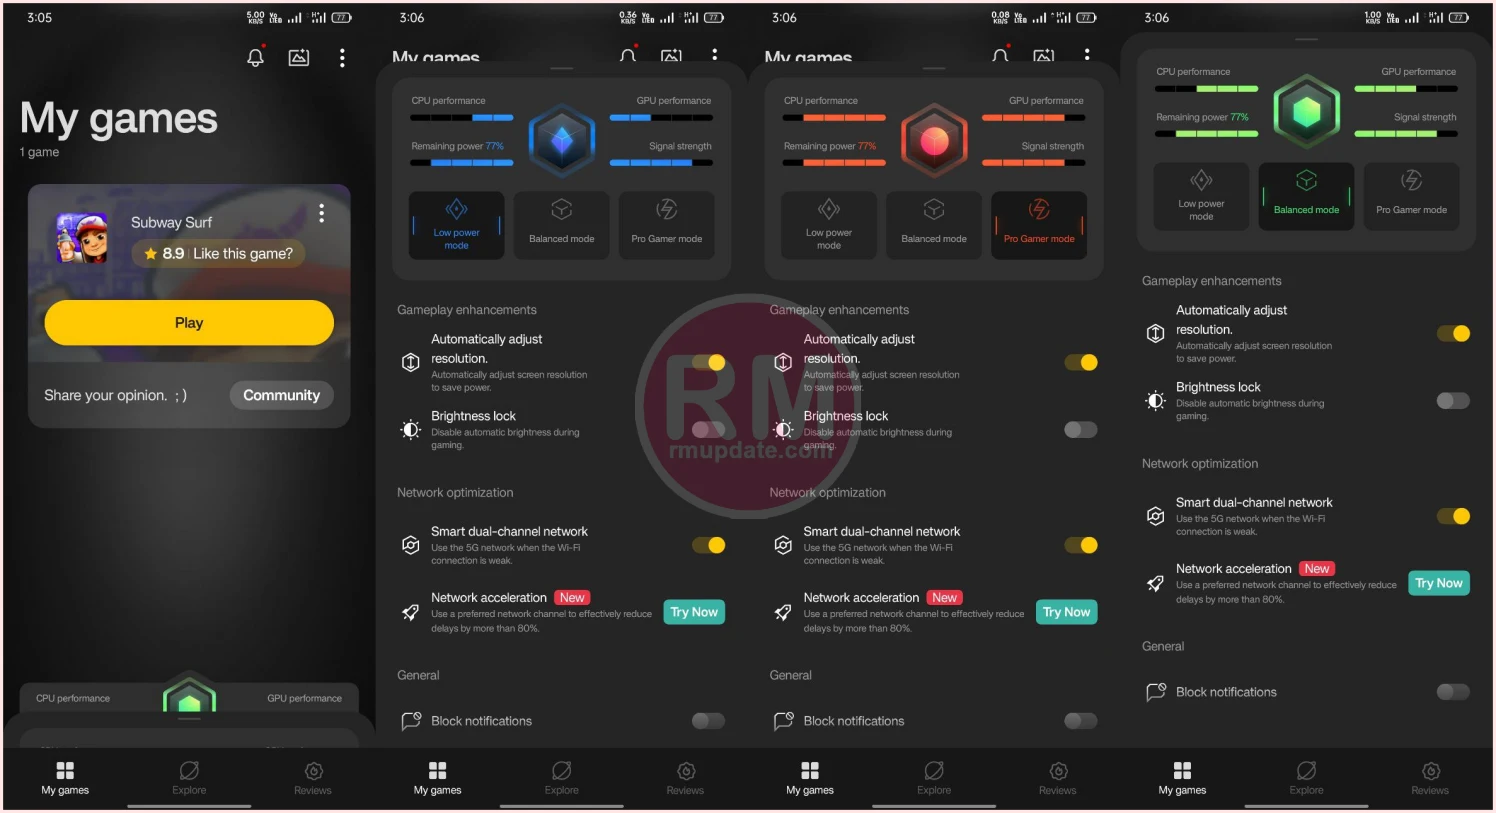 Download Game Space v4.6.7: Redesign UI and New Features For Realme UI 2.0